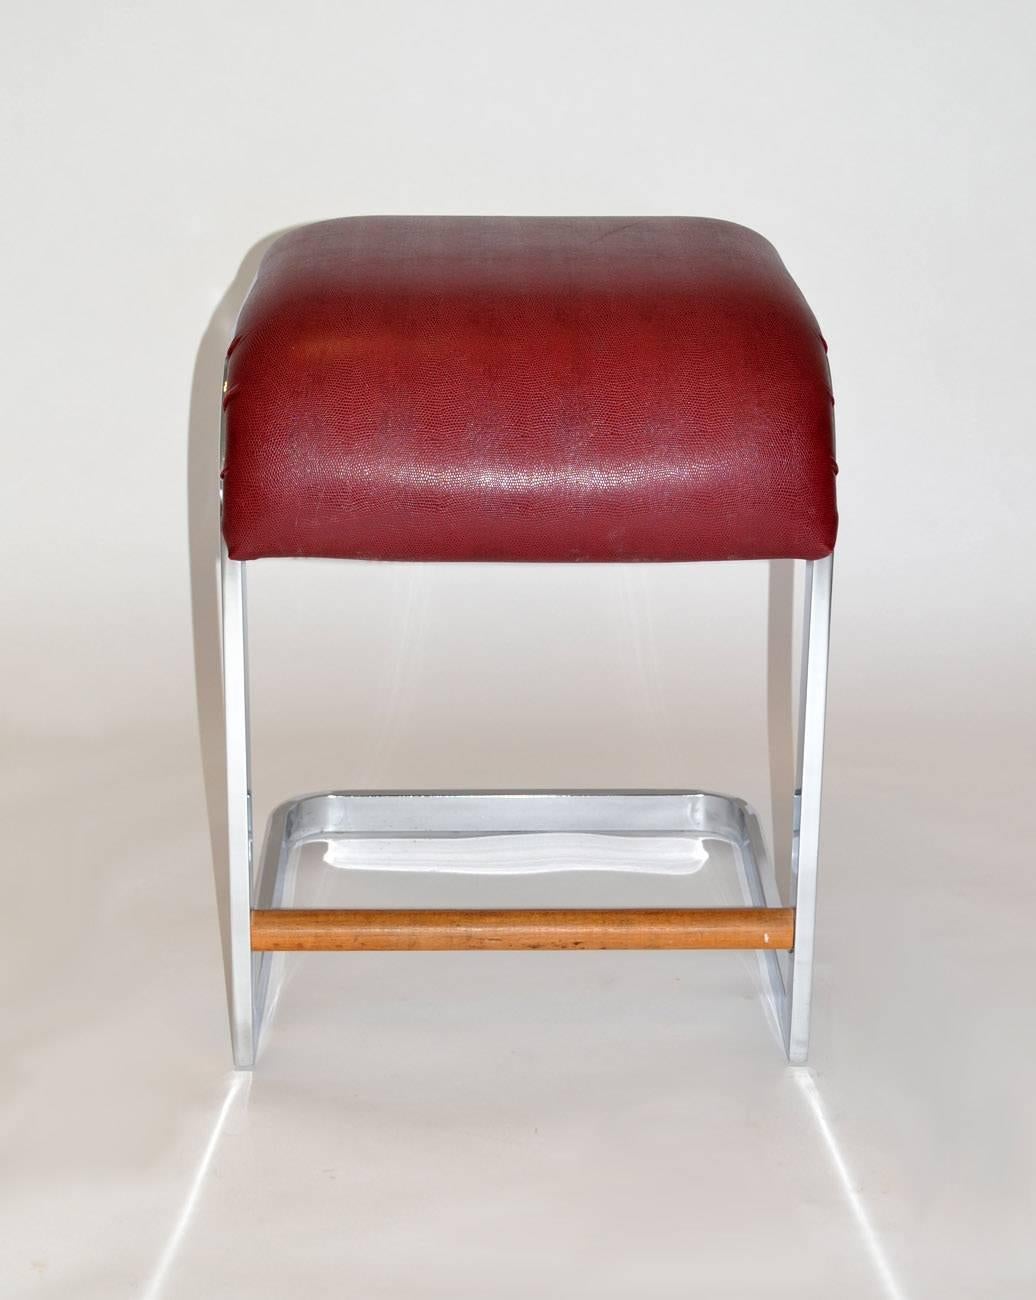 Pair of leather and chrome bar / counter stools by Design Institute of America, circa 1970s. Cantilevered chrome frame, embossed leather, wood. Signed.

 